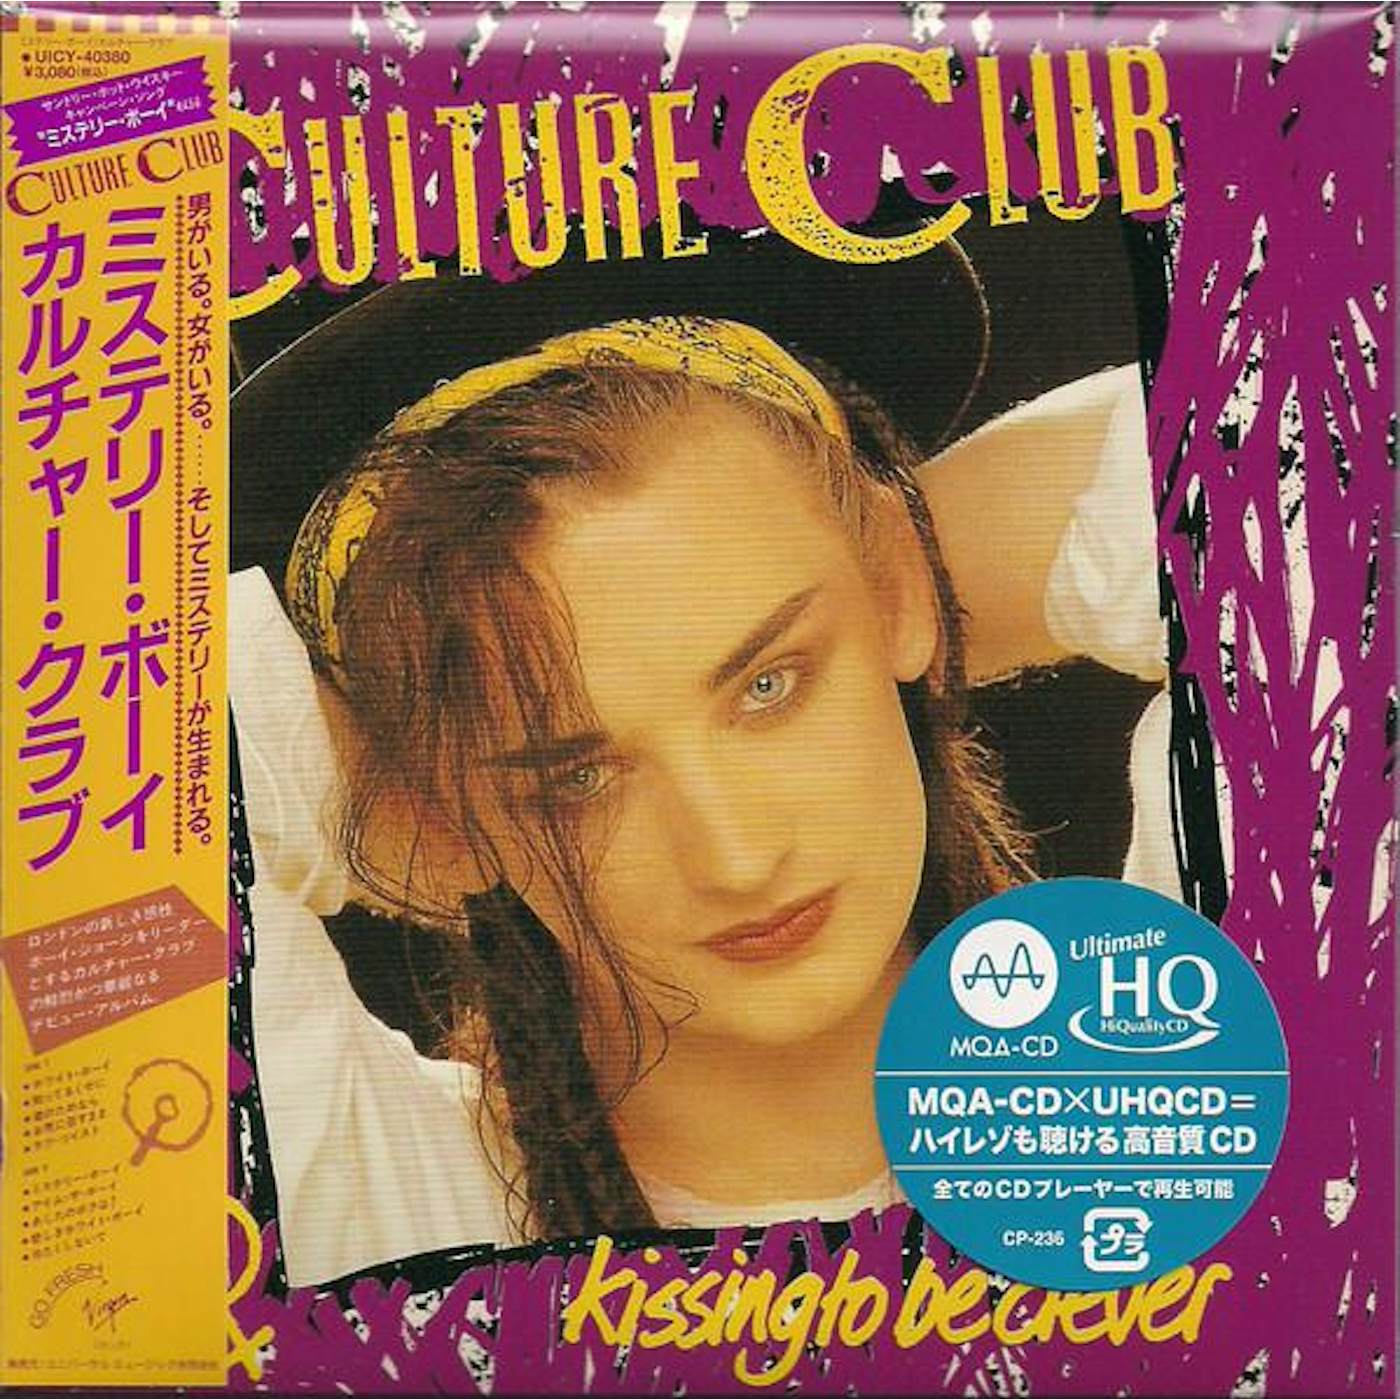 Culture Club KISSING TO BE CLEVER CD